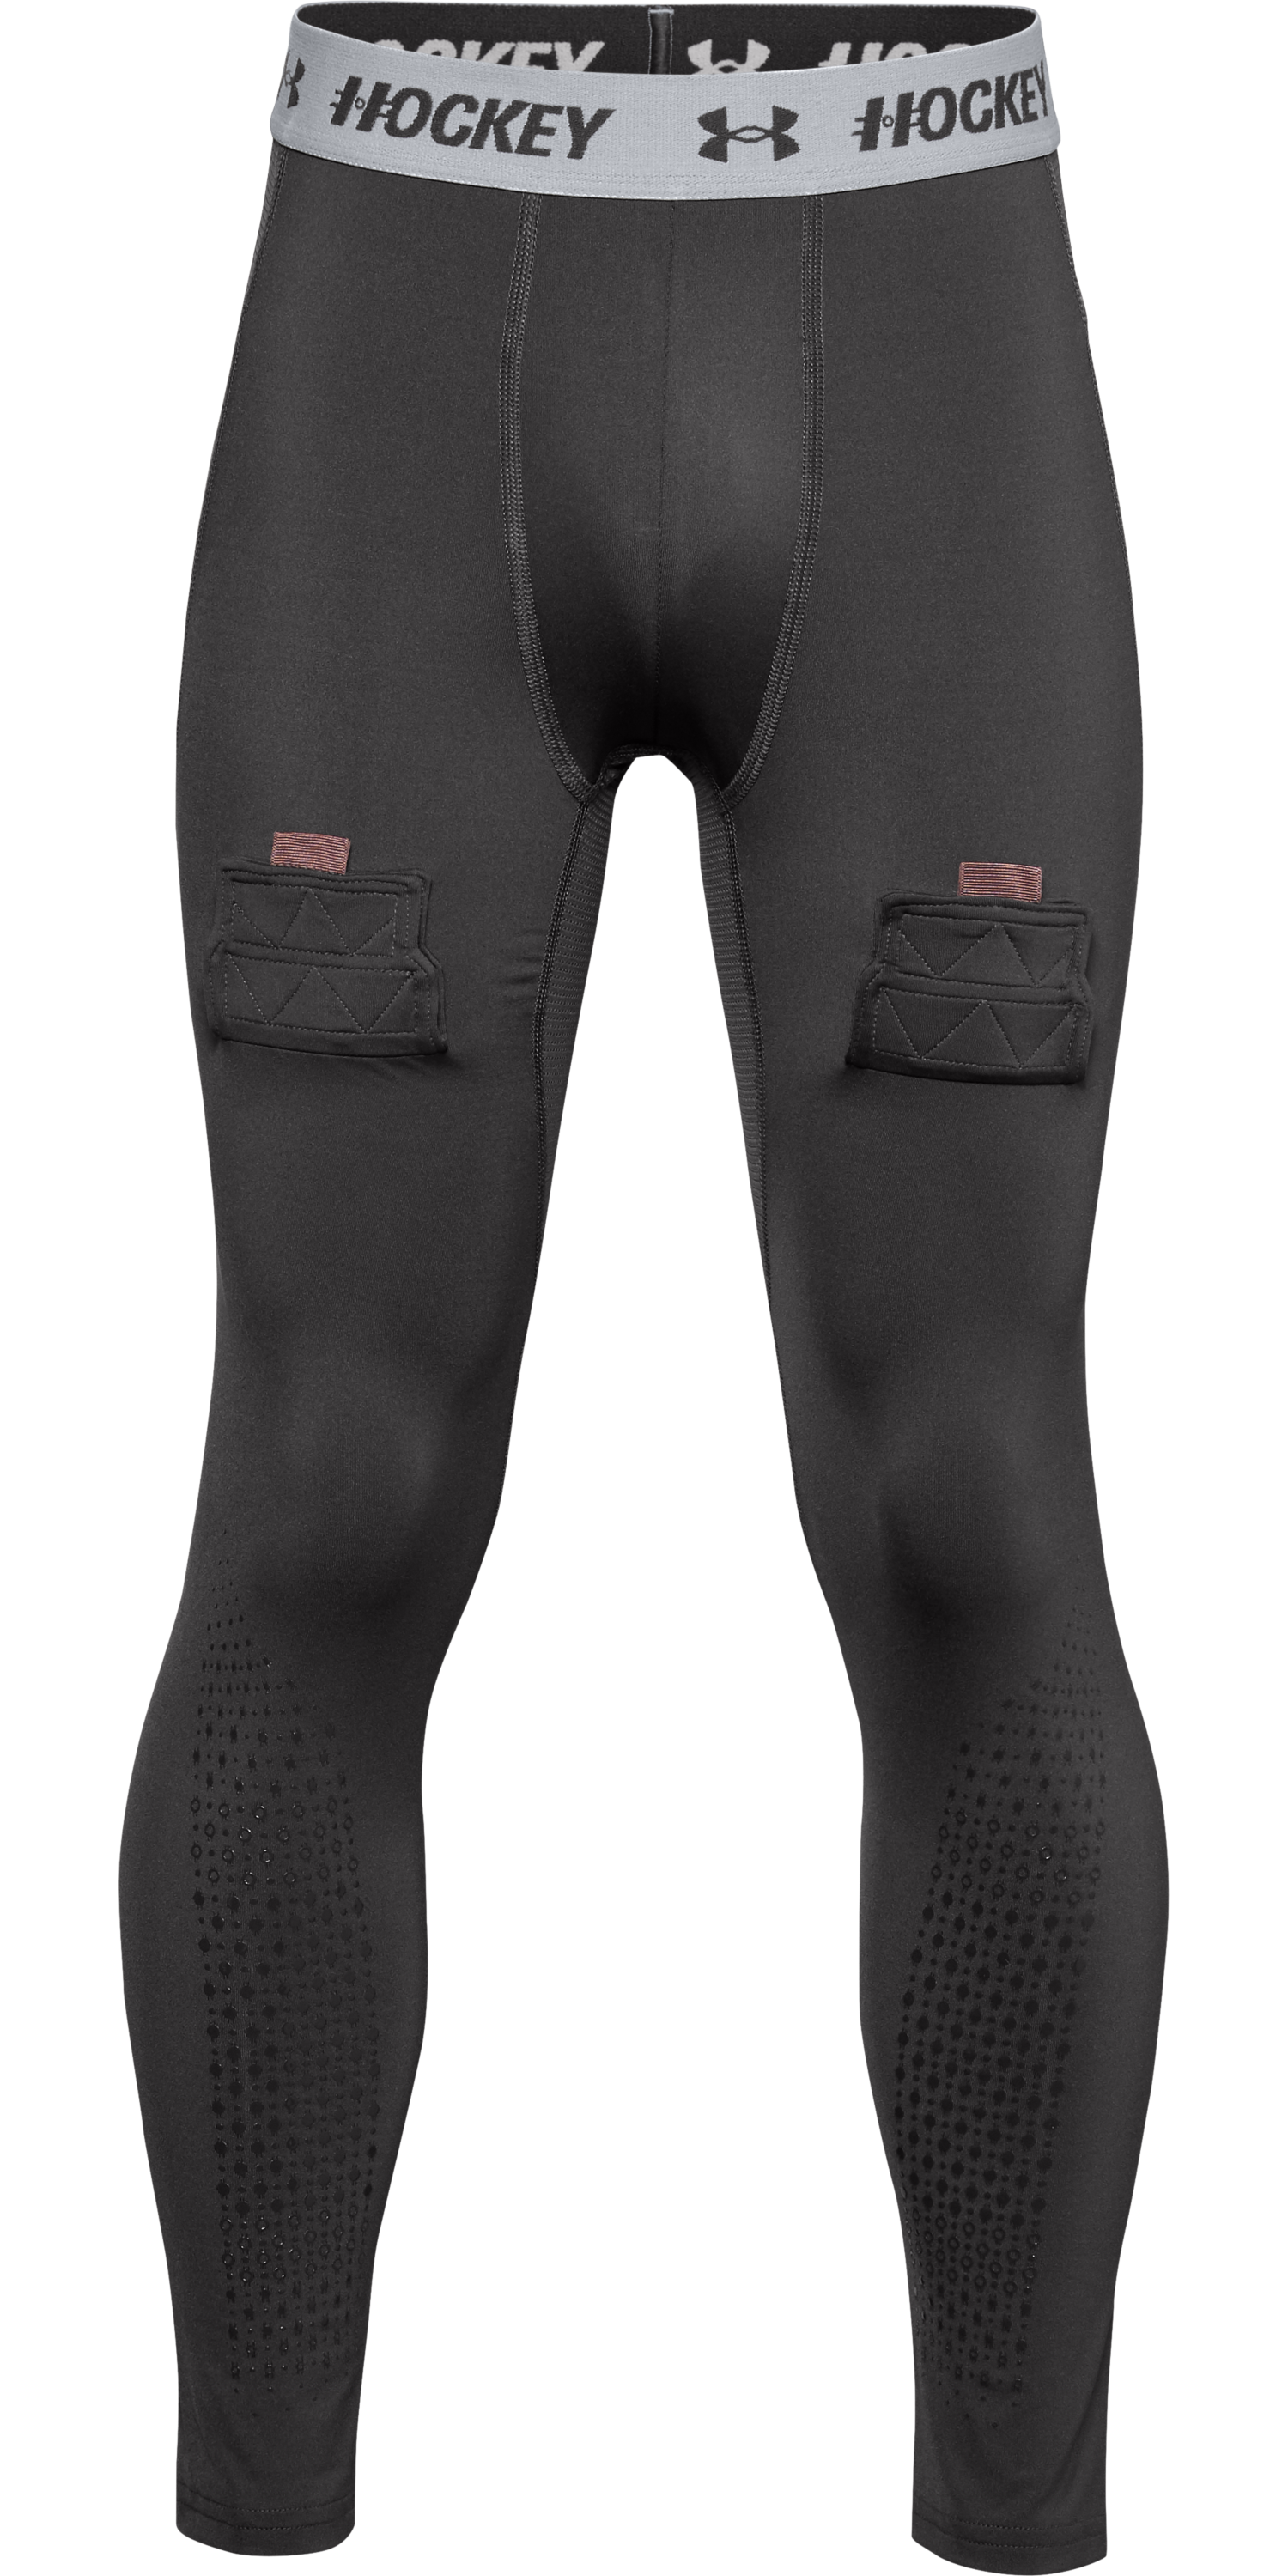 Junior Boys' [8-20] Youth Hockey Fitted Legging from Under Armour